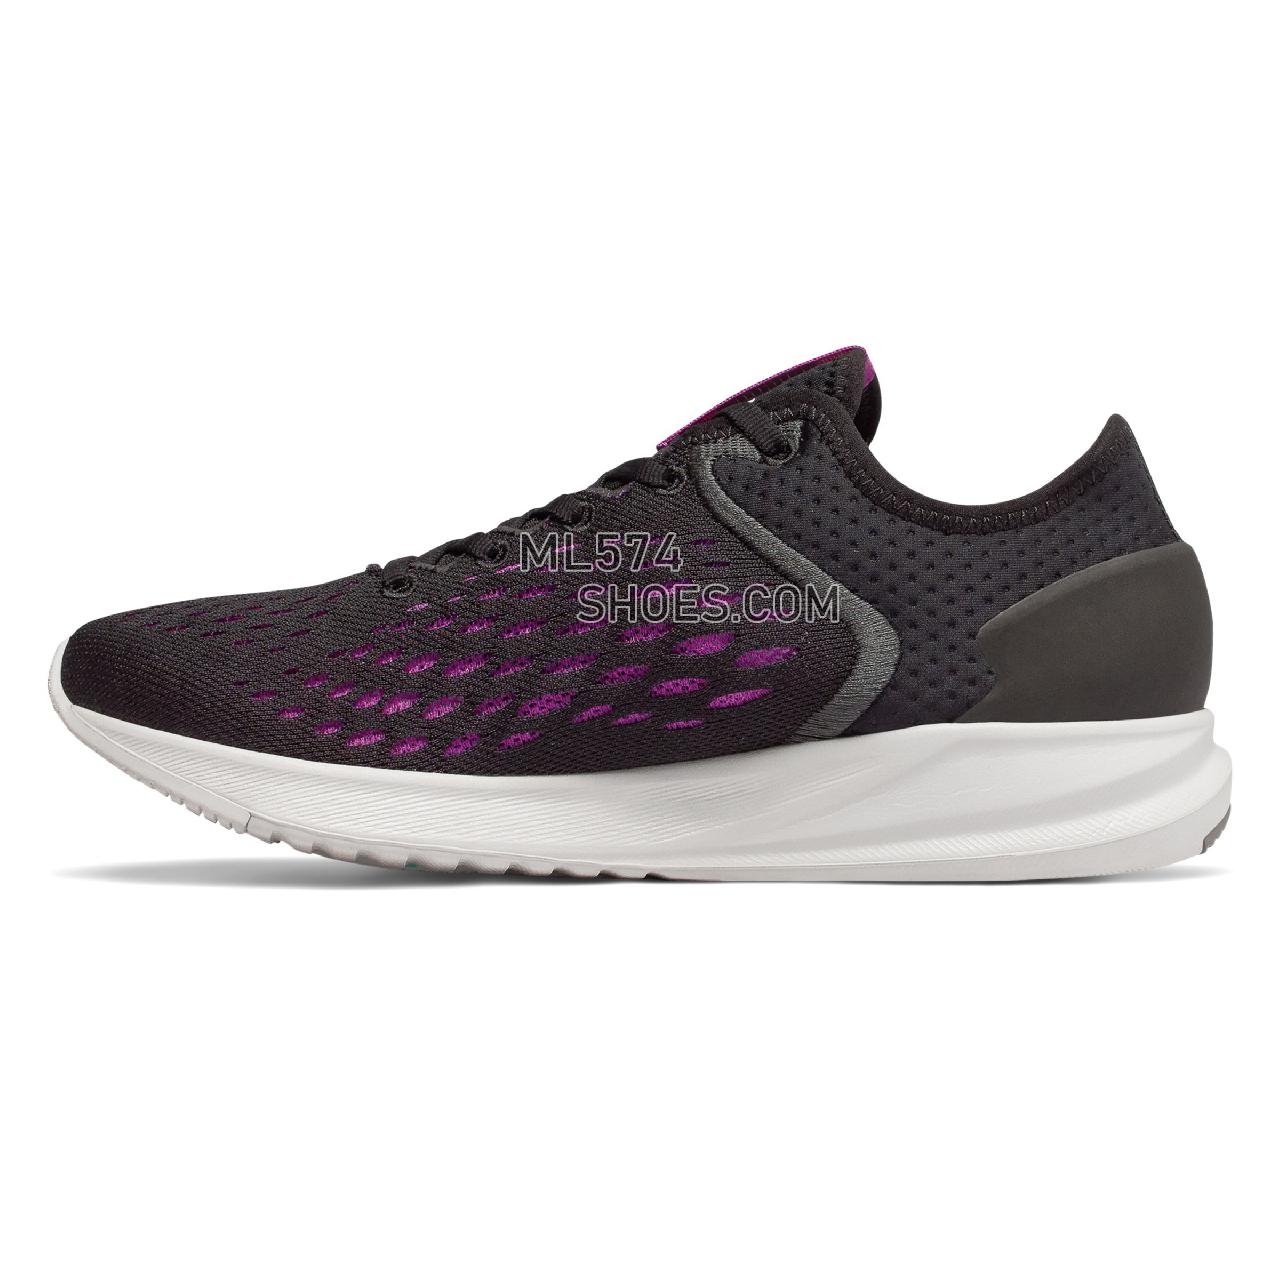 New Balance FuelCore 5000 - Women's FuelCore 5000 Running - Black with Voltage Violet - WFL5KBV